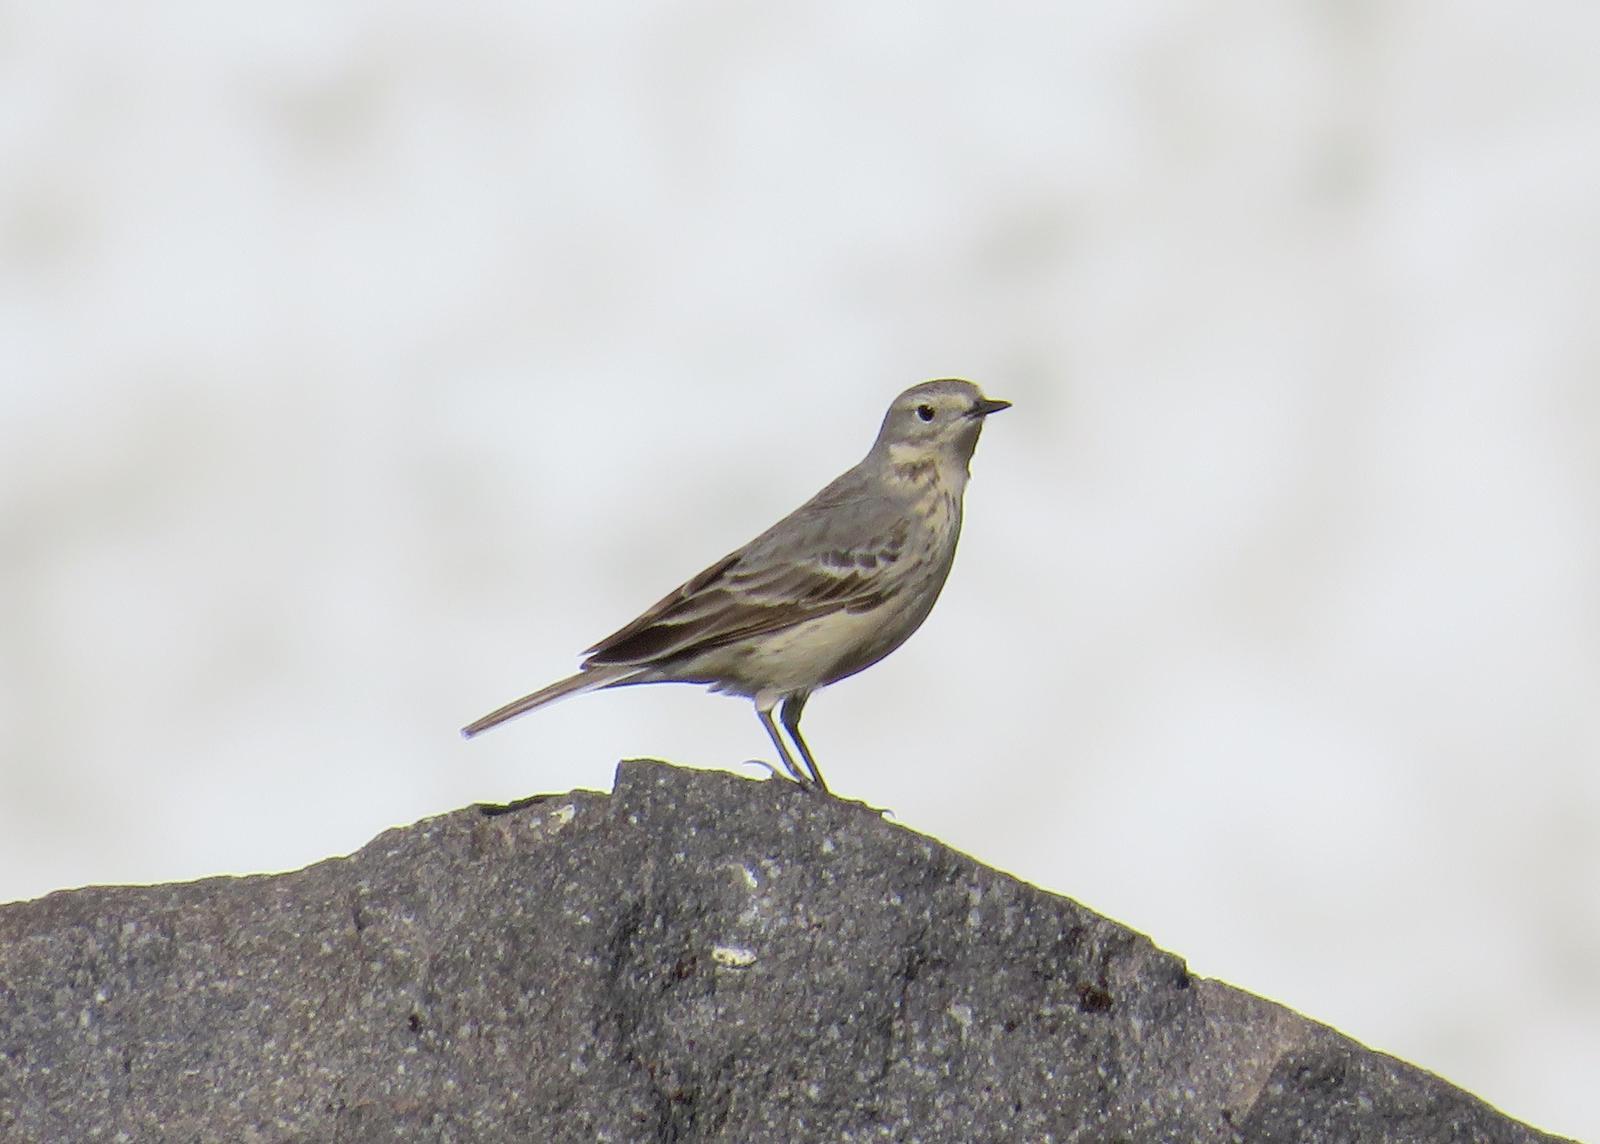 American Pipit Photo by Jeff Harding